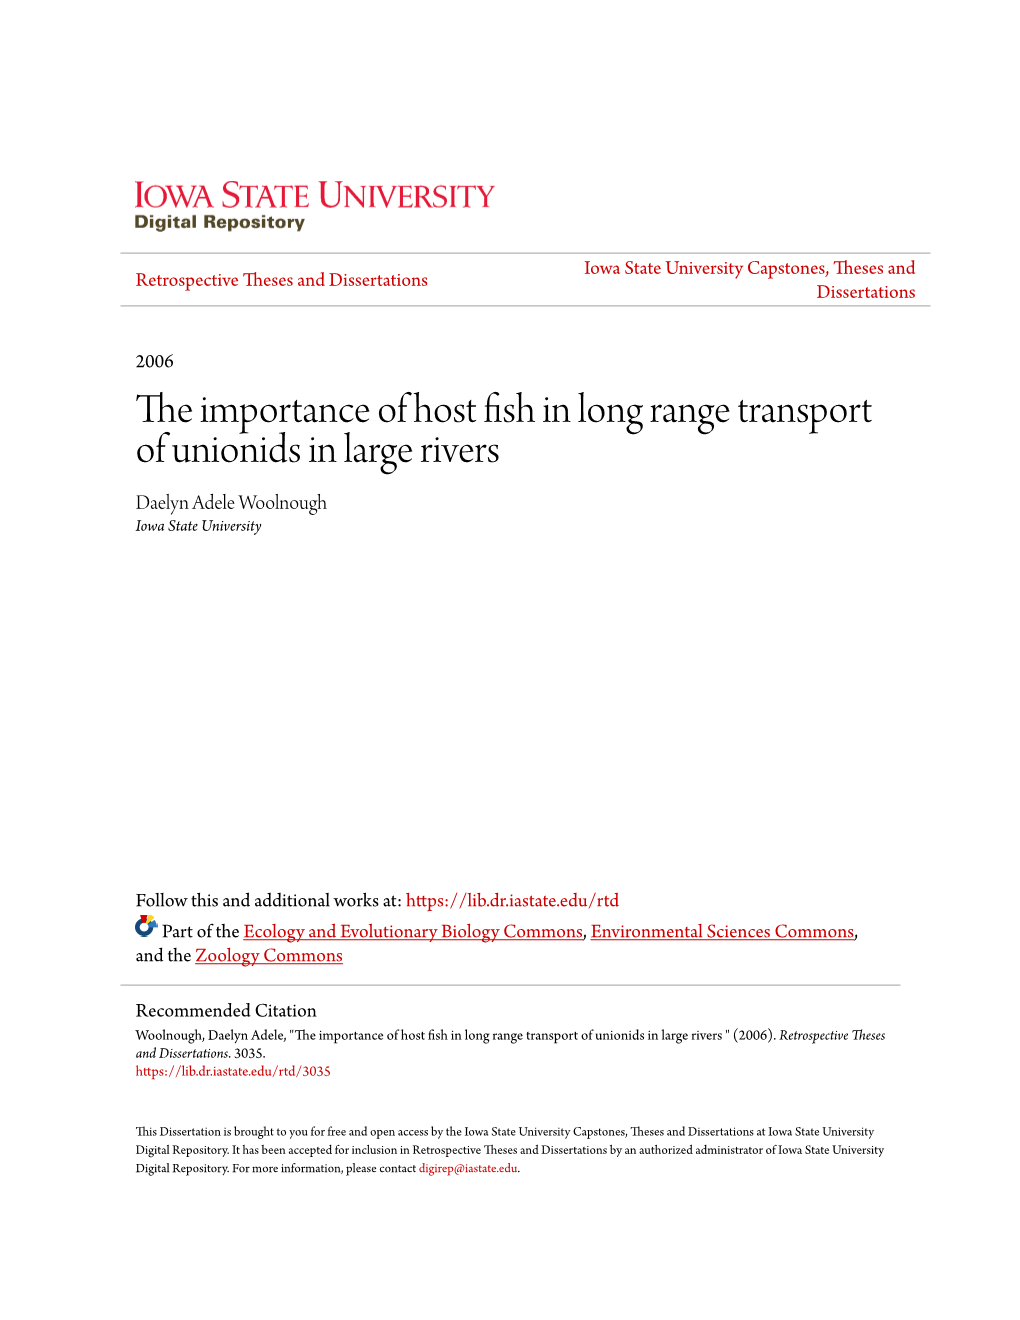 The Importance of Host Fish in Long Range Transport of Unionids in Large Rivers Daelyn Adele Woolnough Iowa State University